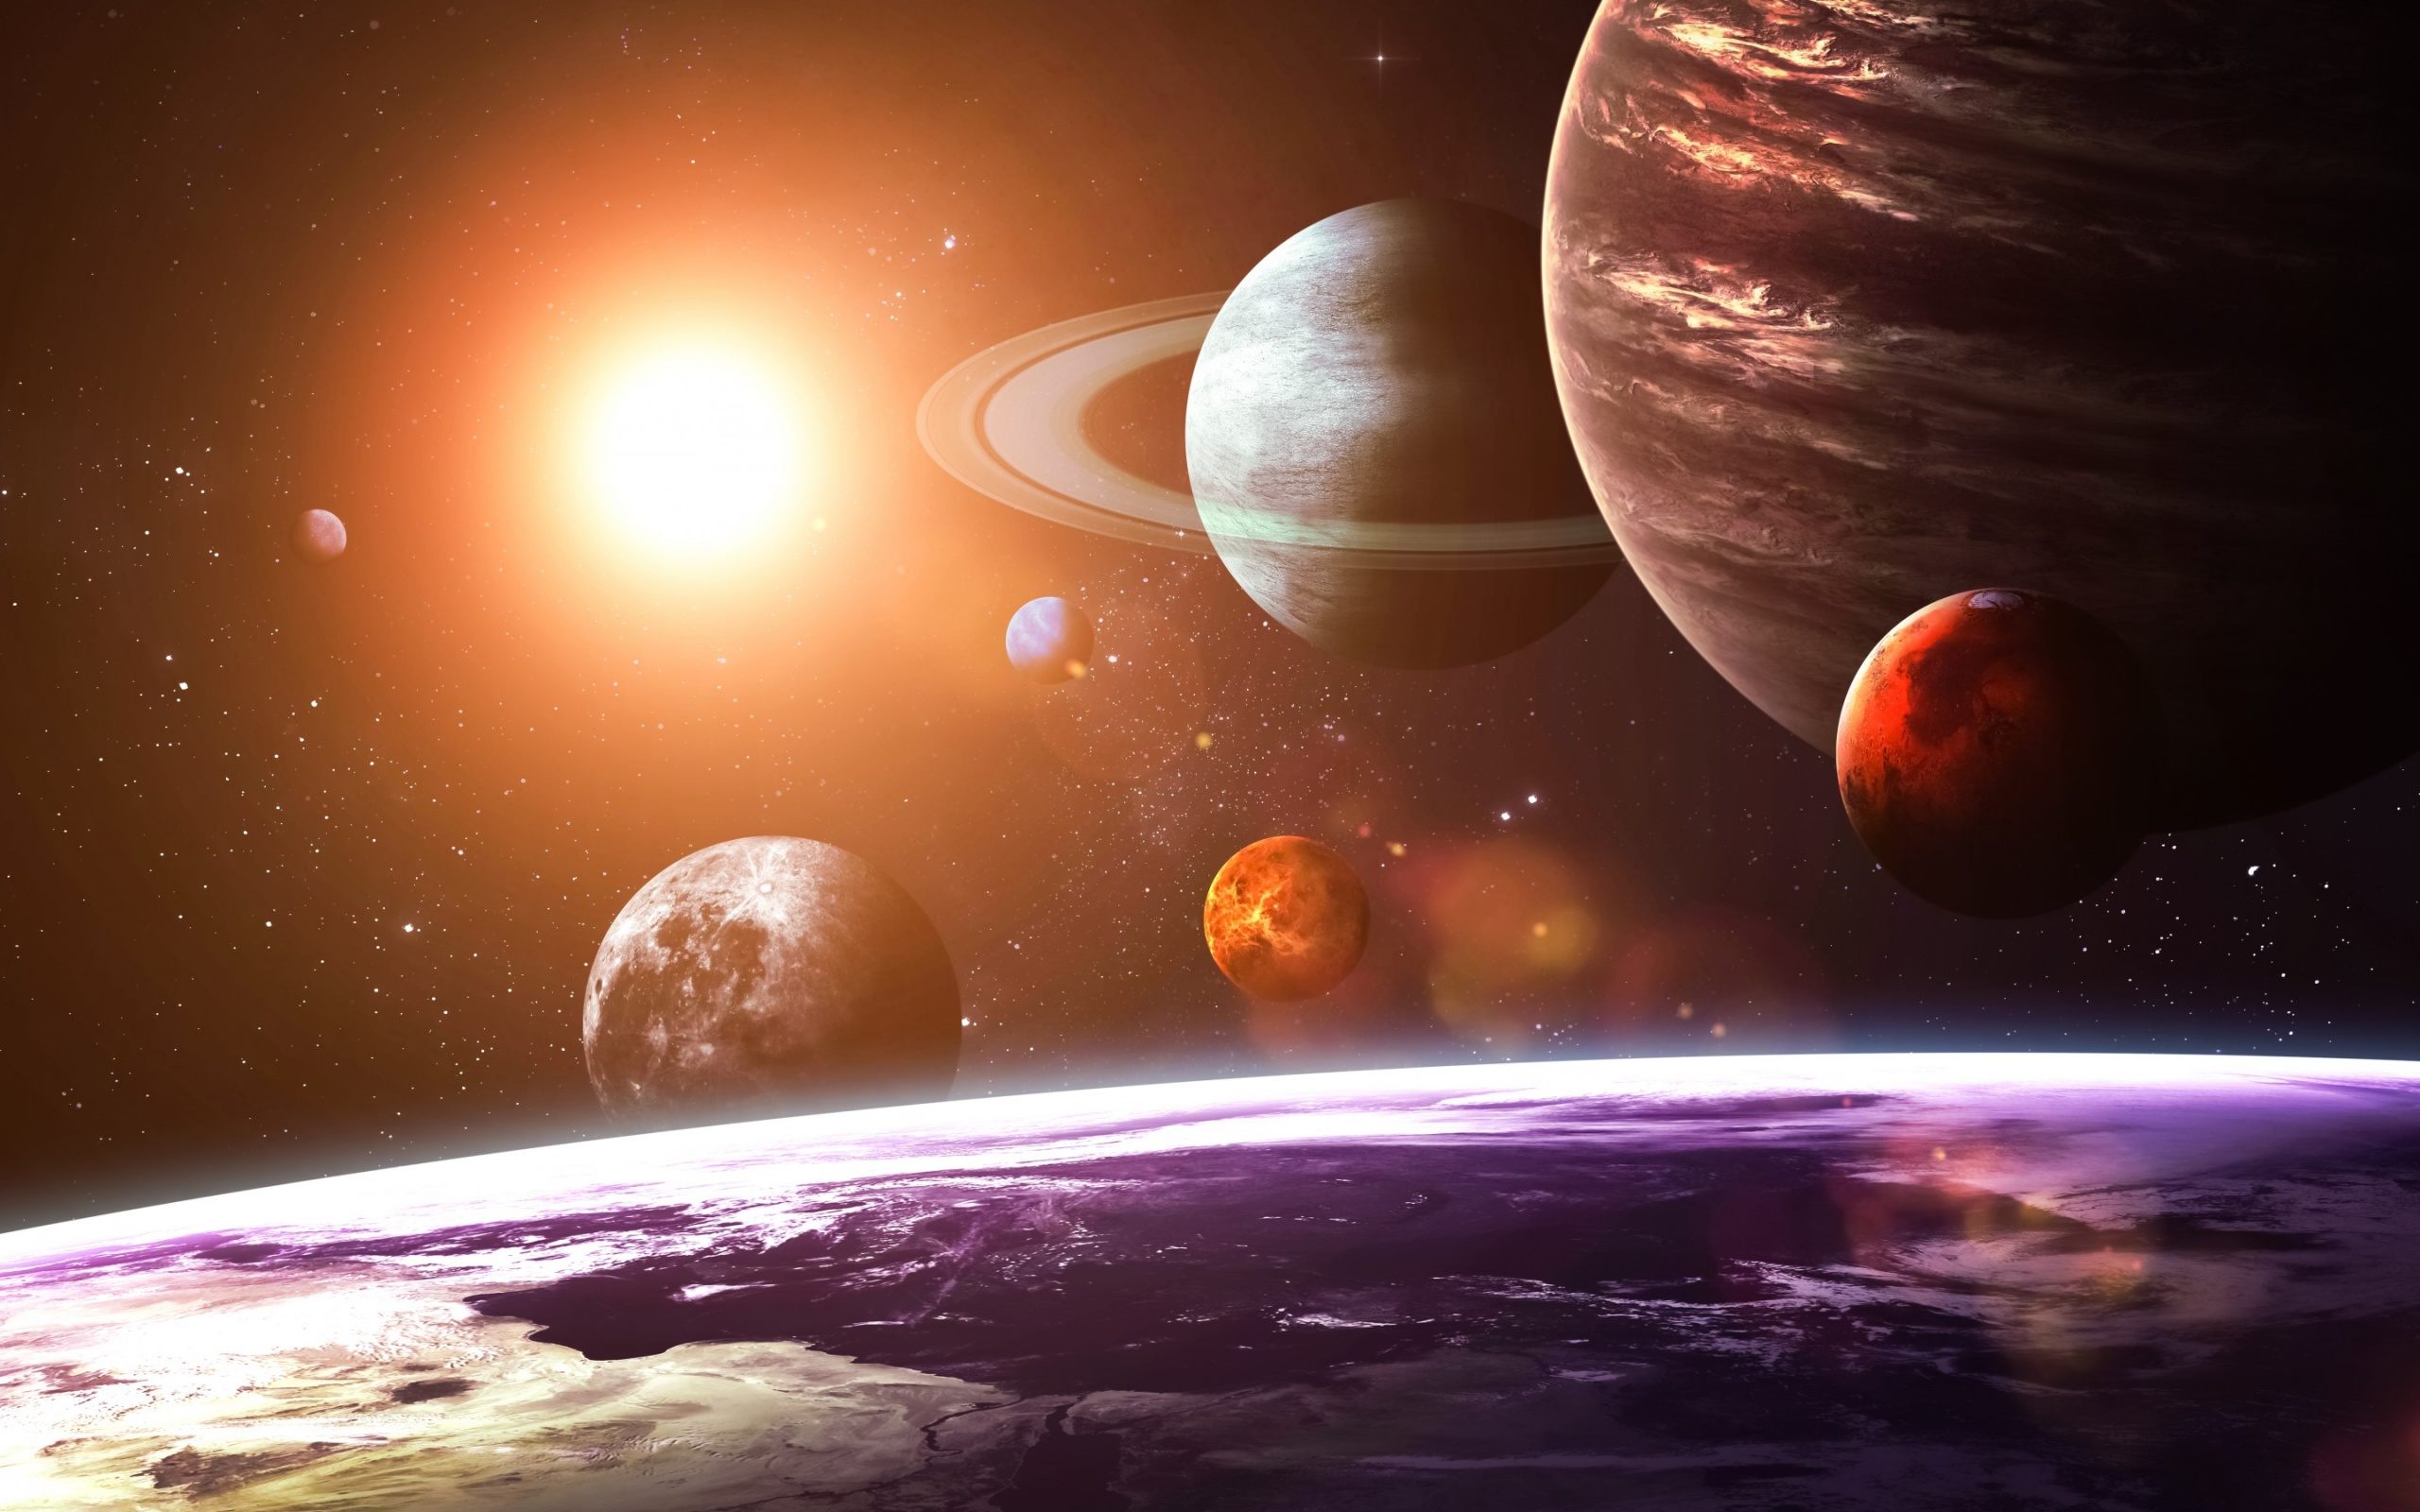 The Solar System Wallpaper HD Of Pla Amp Space